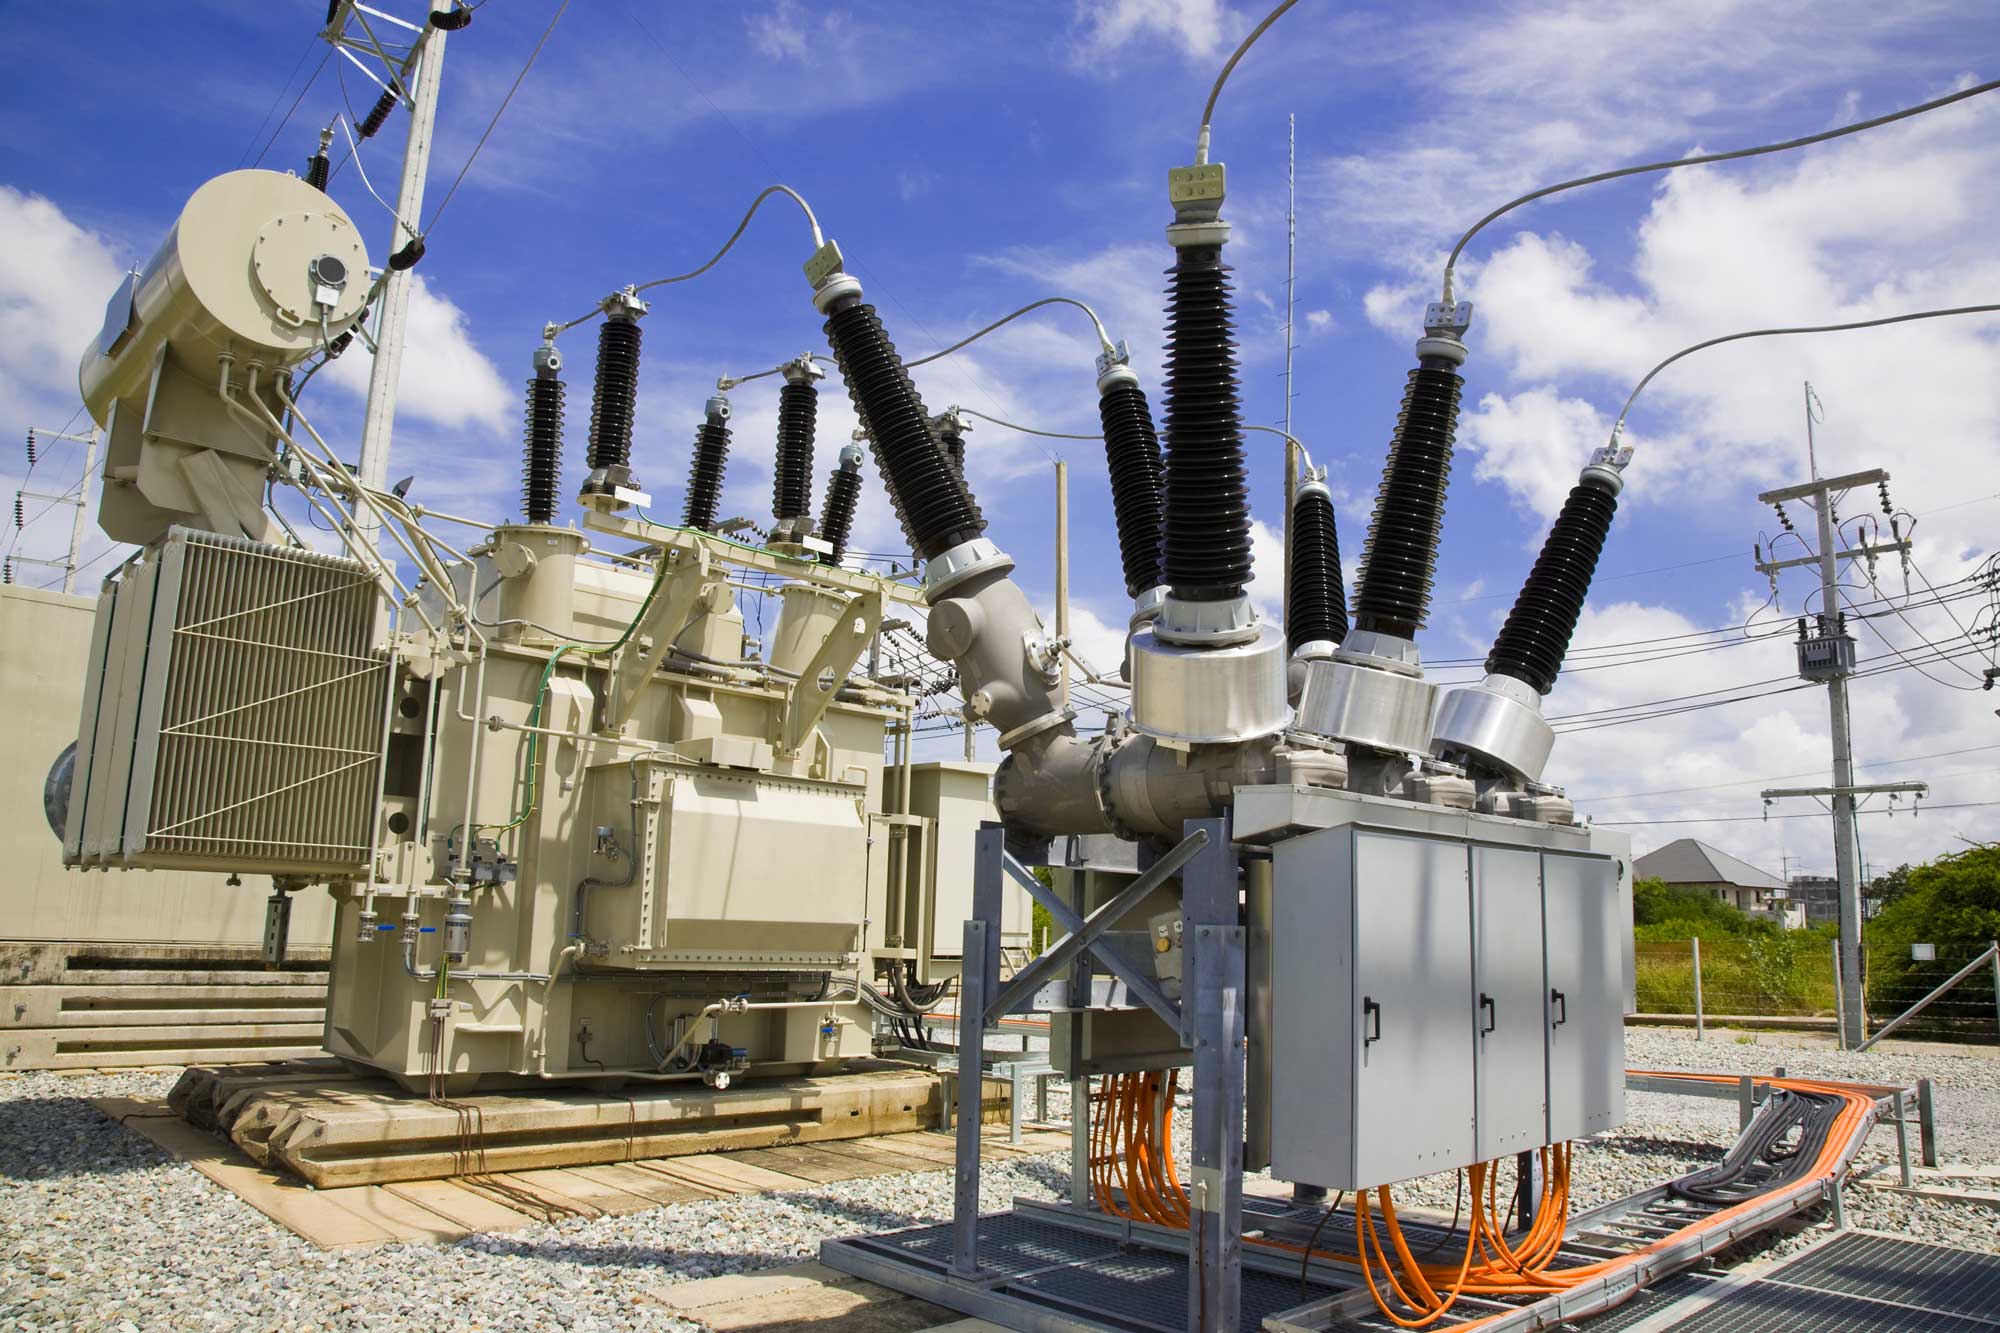 Uasin Gishu County to Install 200 Transformers to Achieve 90% Connectivity